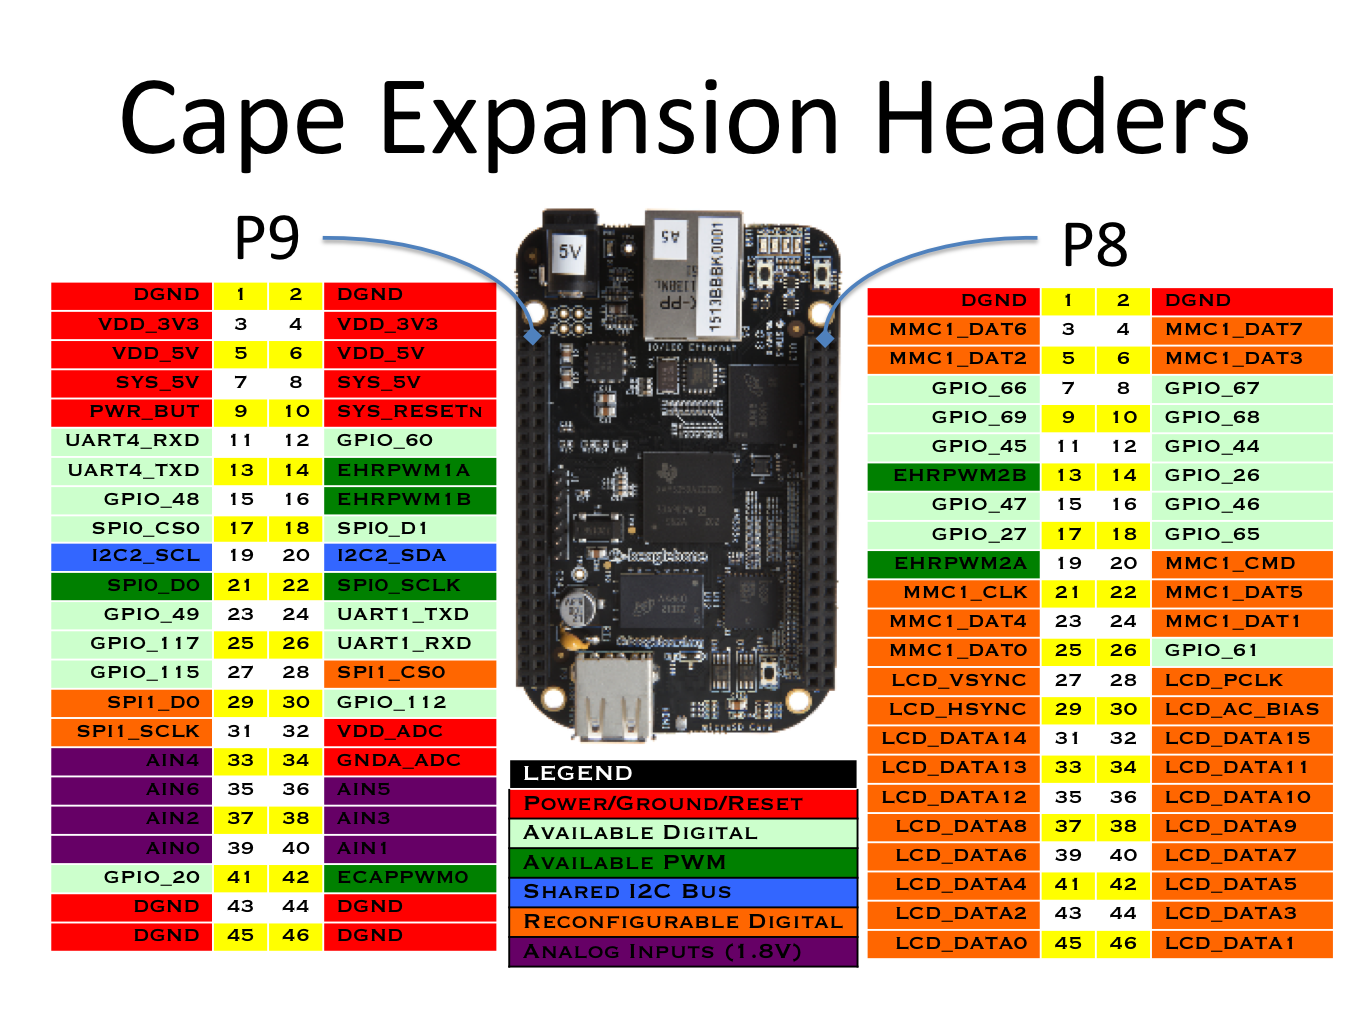 http://beagleboard.org/static/images/cape-headers.png